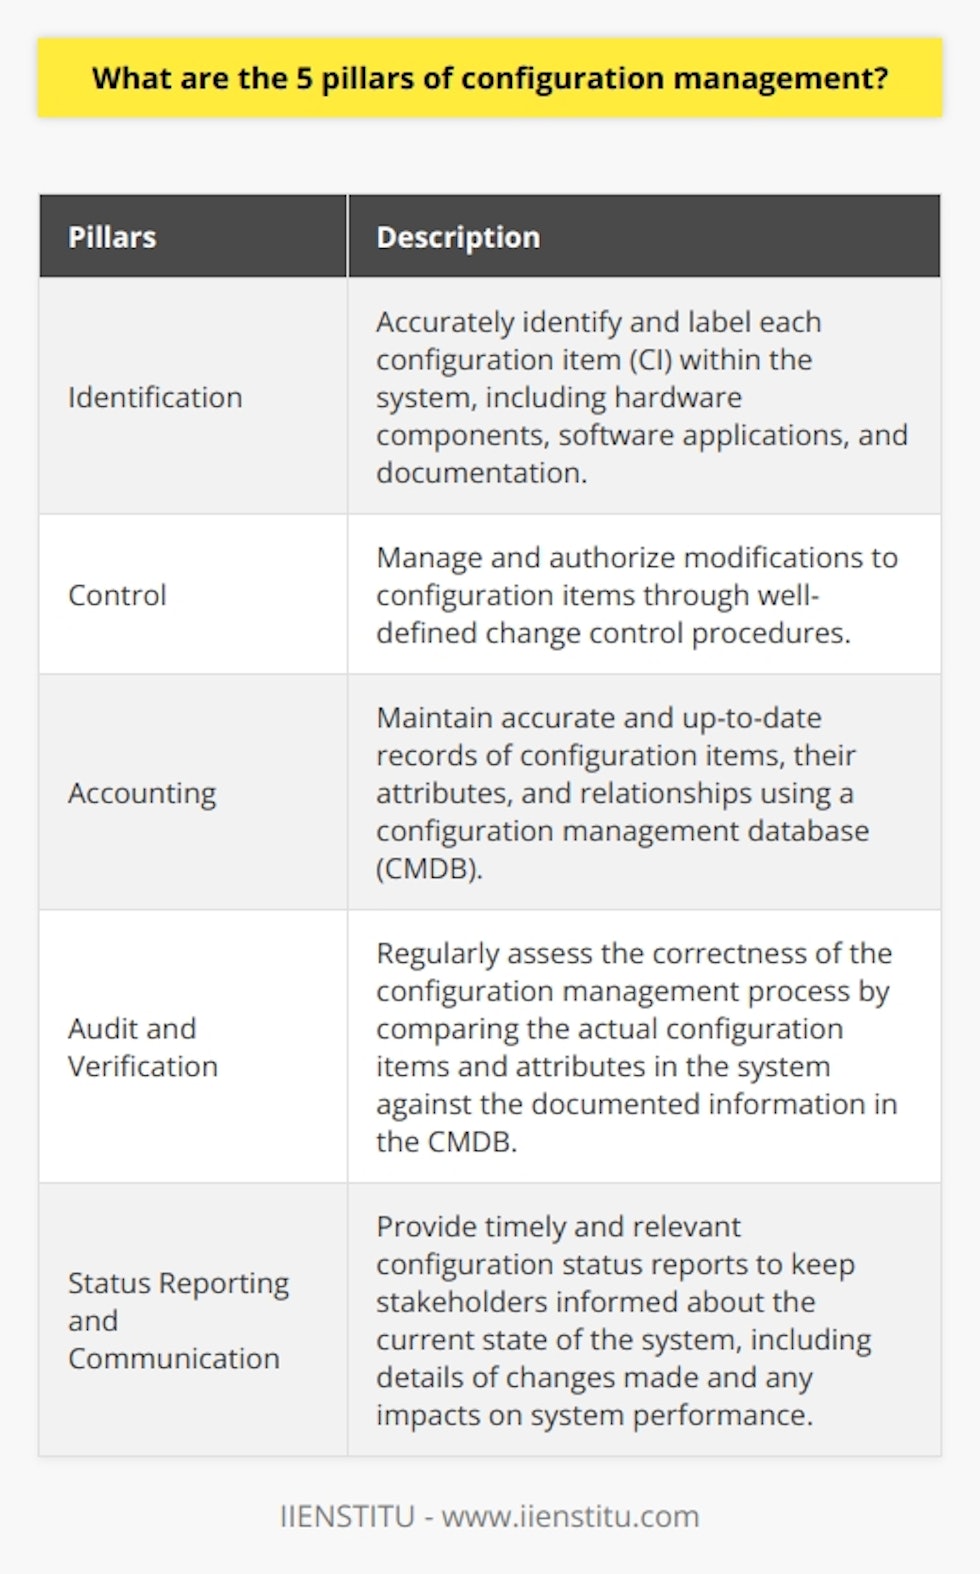 Configuration management is a vital process in ensuring the consistency, functionality, and reliability of a system. To effectively implement configuration management, there are five pillars that need to be understood and followed: identification, control, accounting, audit, and status reporting.The first pillar of configuration management is identification. It is crucial to accurately identify and label each configuration item (CI) within the system. Configuration items can include hardware components, software applications, and documentation. Proper identification allows for efficient tracking and control of changes, preventing conflicts and enhancing system reliability.The second pillar is control. Change control is the process of managing and authorizing modifications to configuration items. This involves recording each alteration, submitting it for approval, and implementing it smoothly. By employing well-defined change control procedures, an organization ensures the stability of the system while incorporating necessary updates or enhancements.The third pillar is accounting. Configuration accounting involves maintaining accurate and up-to-date records of configuration items, their attributes, and relationships. This includes the use of a configuration management database (CMDB) as a central repository of information about an organization's IT infrastructure. Effective configuration accounting ensures compliance with established baselines, making it easier to trace and resolve issues.The fourth pillar is audit and verification. Regular audits are essential for assessing the correctness of the configuration management process. This involves comparing the actual configuration items and their attributes in the system against the documented information in the CMDB. Audits help identify discrepancies, enforce compliance with standards and regulatory requirements, and recommend corrective actions to maintain system integrity.The fifth and final pillar is status reporting and communication. Timely and relevant configuration status reports are crucial in keeping stakeholders informed about the current state of the system. These reports outline the details of changes made, the reasons behind them, and any impacts on system performance. Clear communication lines support informed decision-making and promote a proactive approach to maintaining system stability.By adhering to these five pillars of configuration management - identification, control, accounting, audit, and status reporting - organizations can ensure the consistency, functionality, and reliability of their systems. These pillars provide a solid foundation for effective configuration management practices, promoting system stability and success.